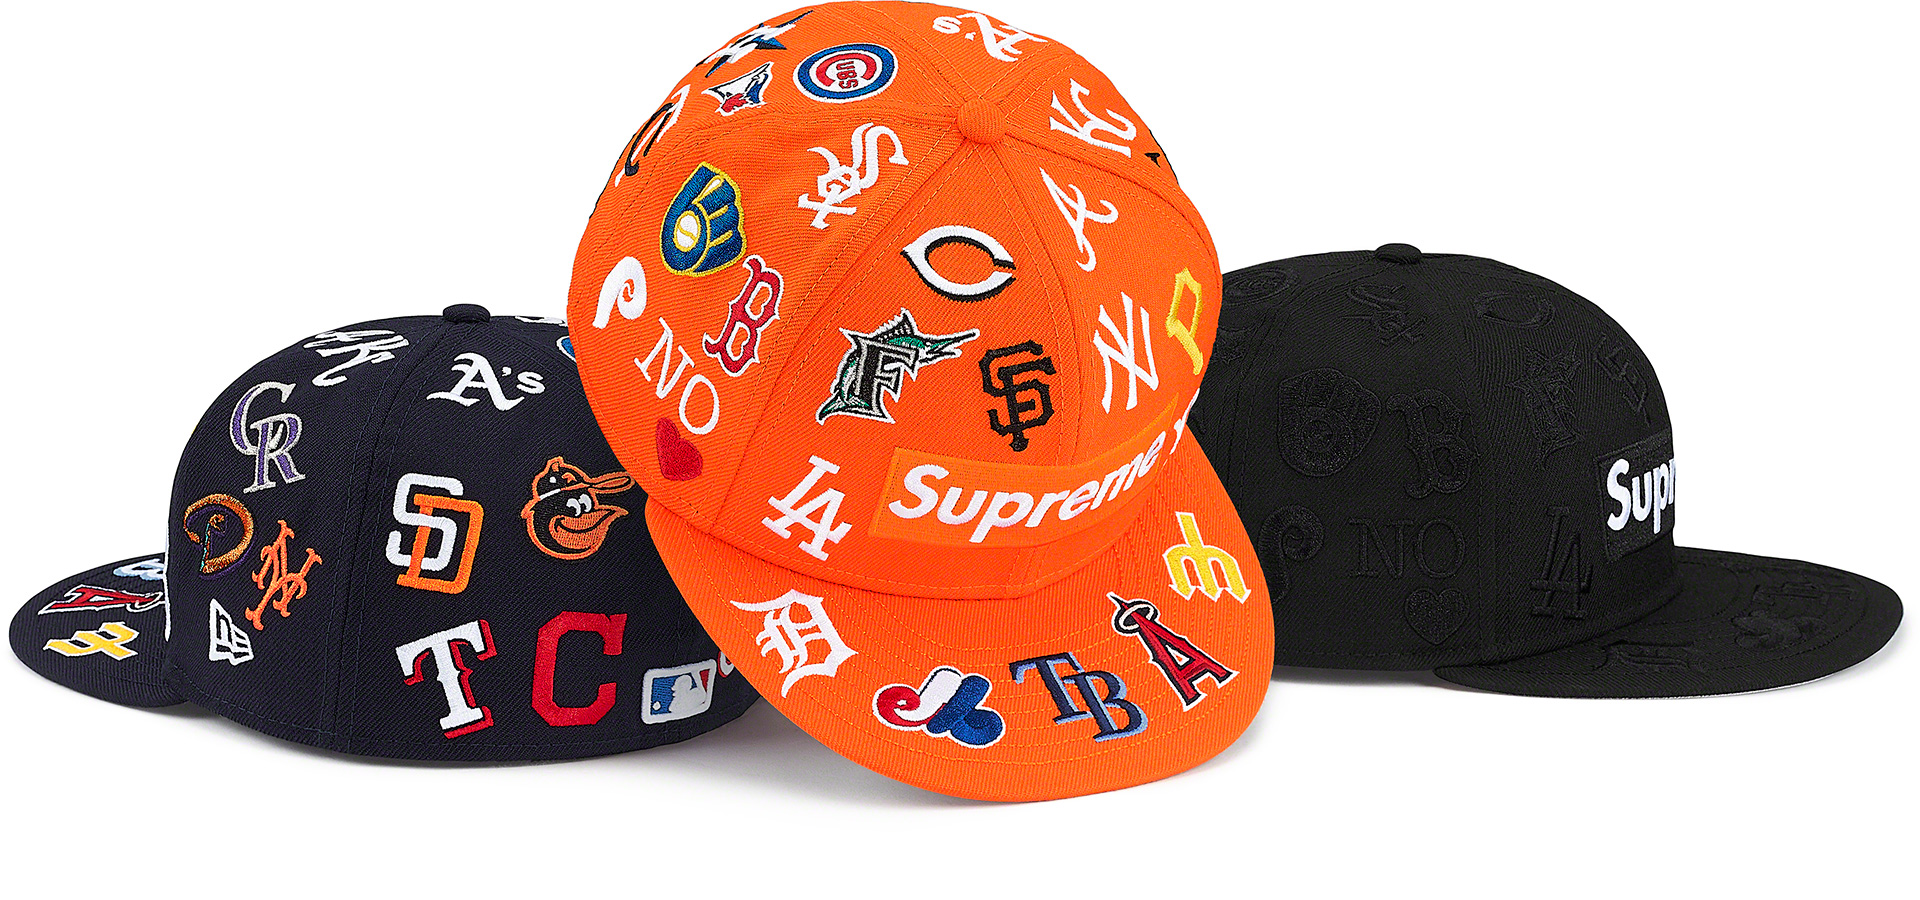 The Supreme x MLB x New Era Collection Drops This Week